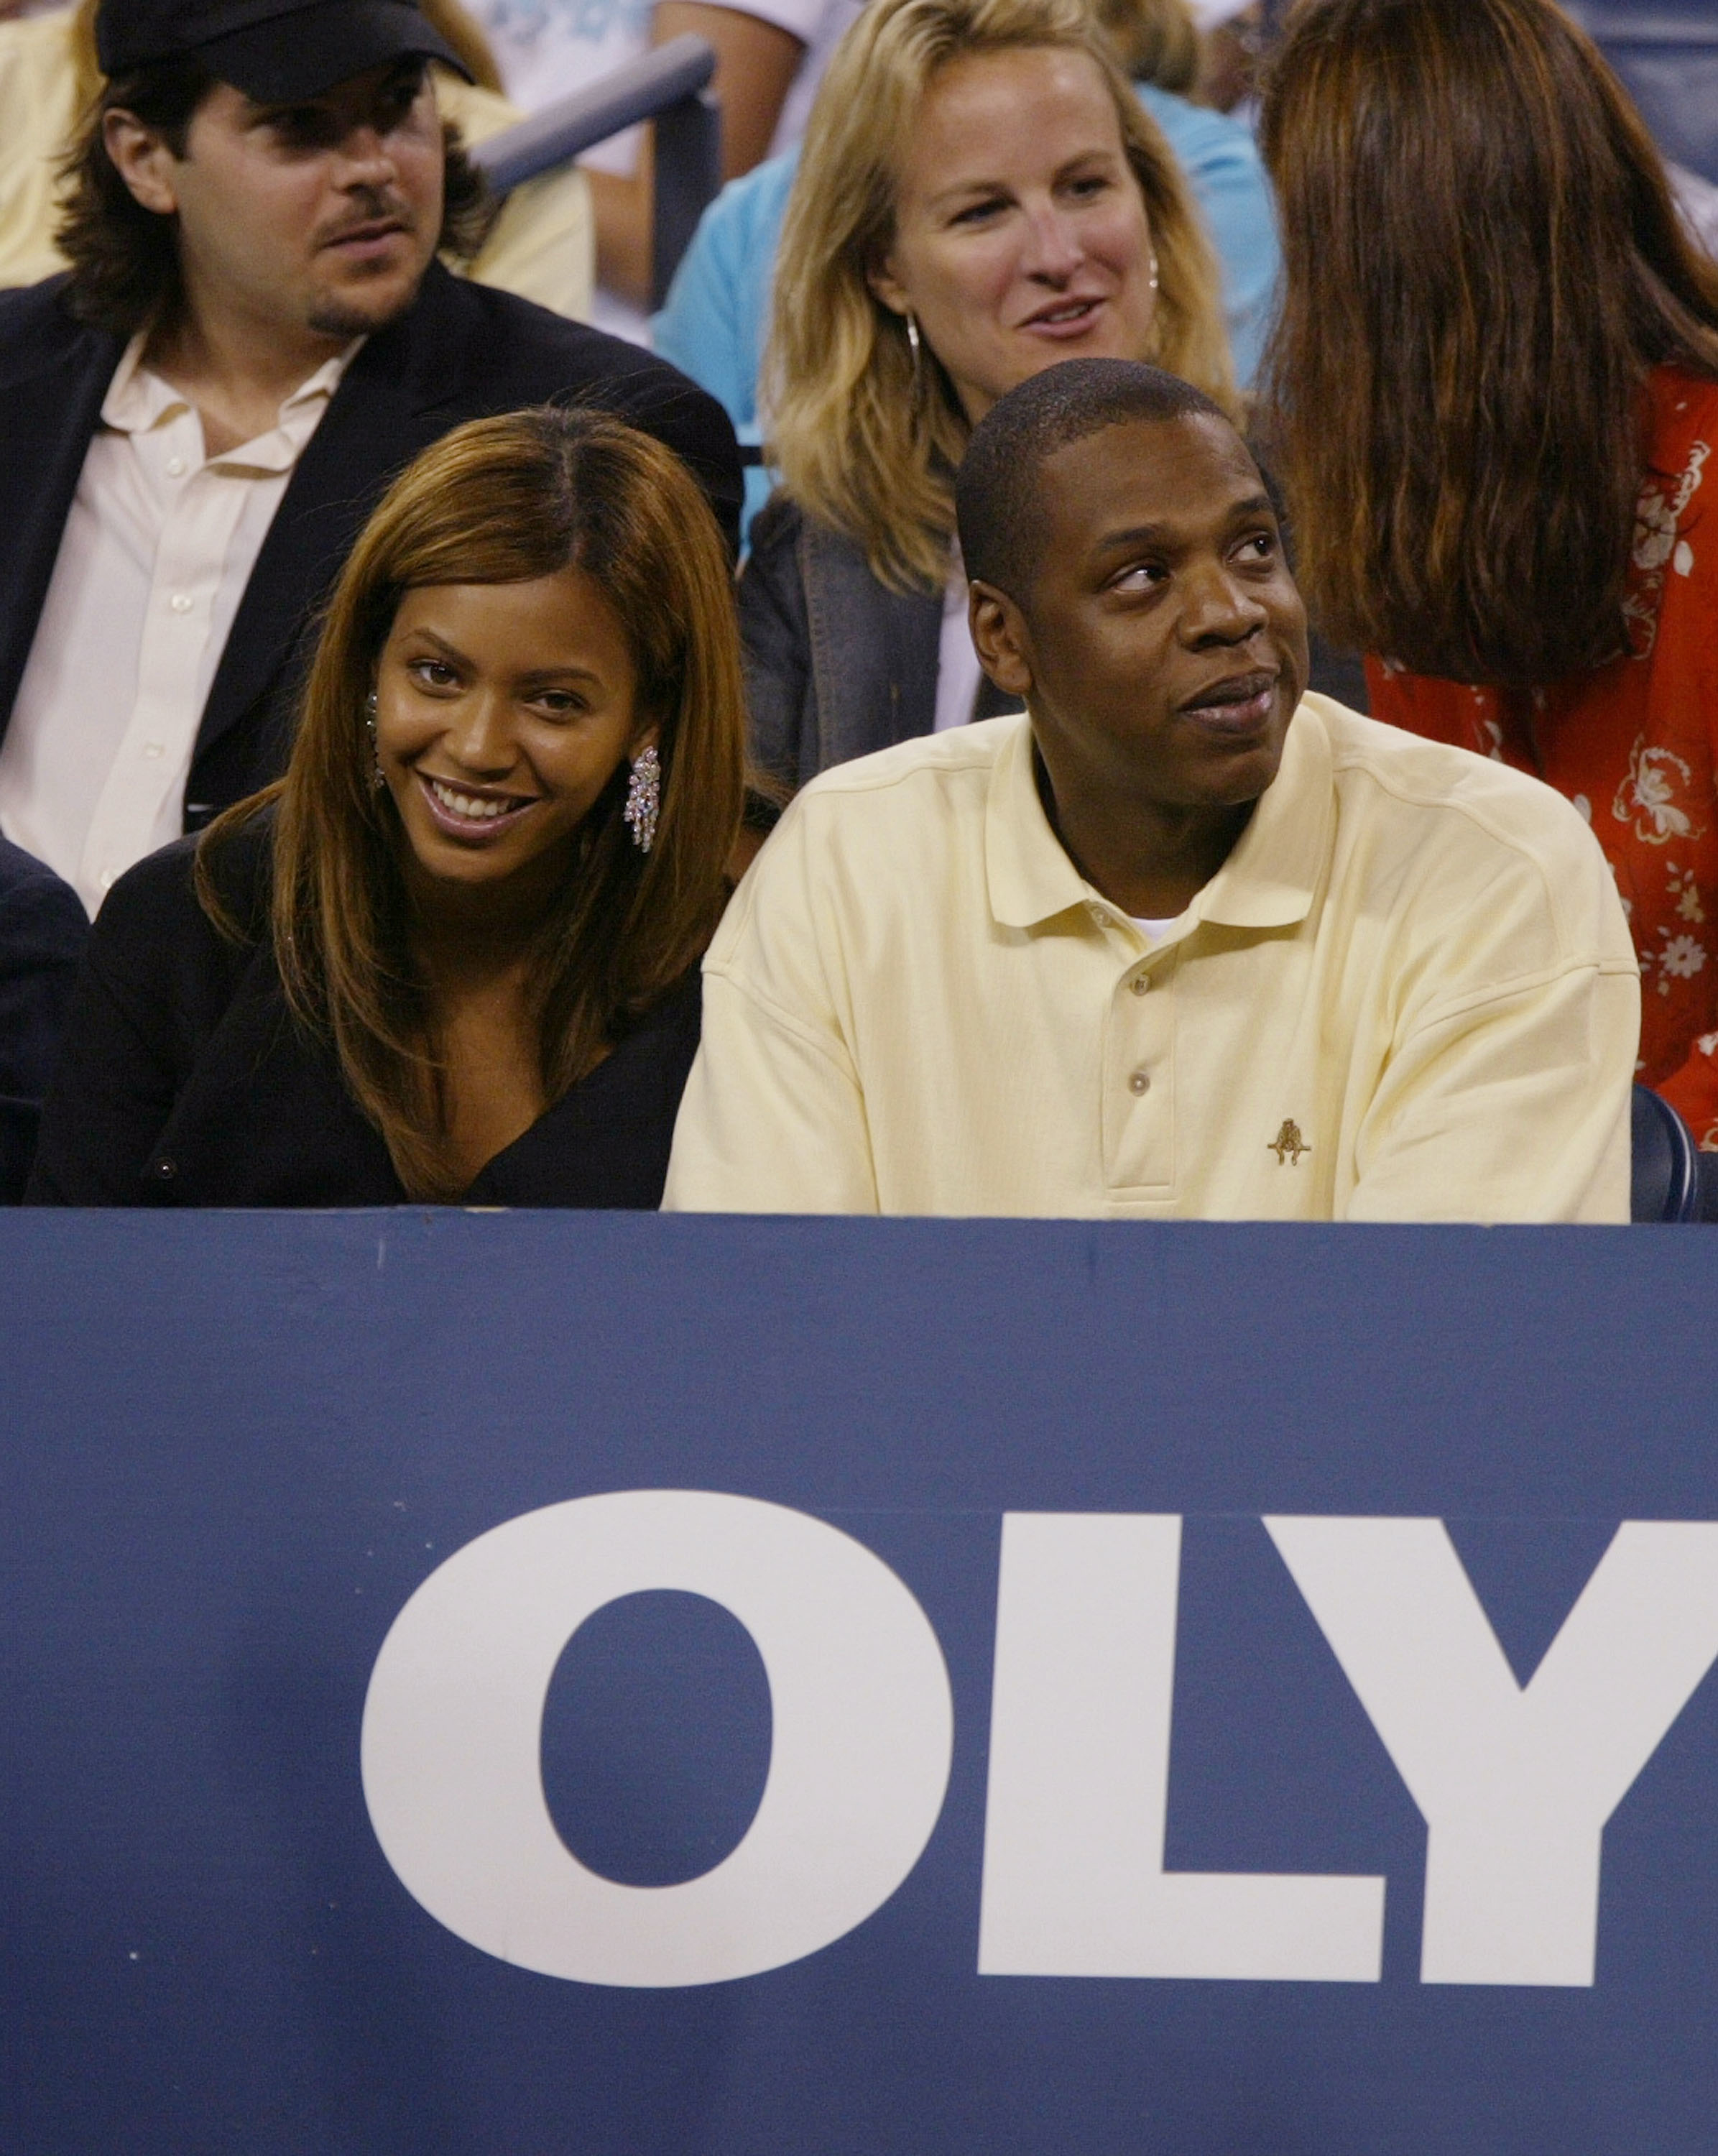 Beyoncé and Jay-Z sitting and smiling in the US Open stands